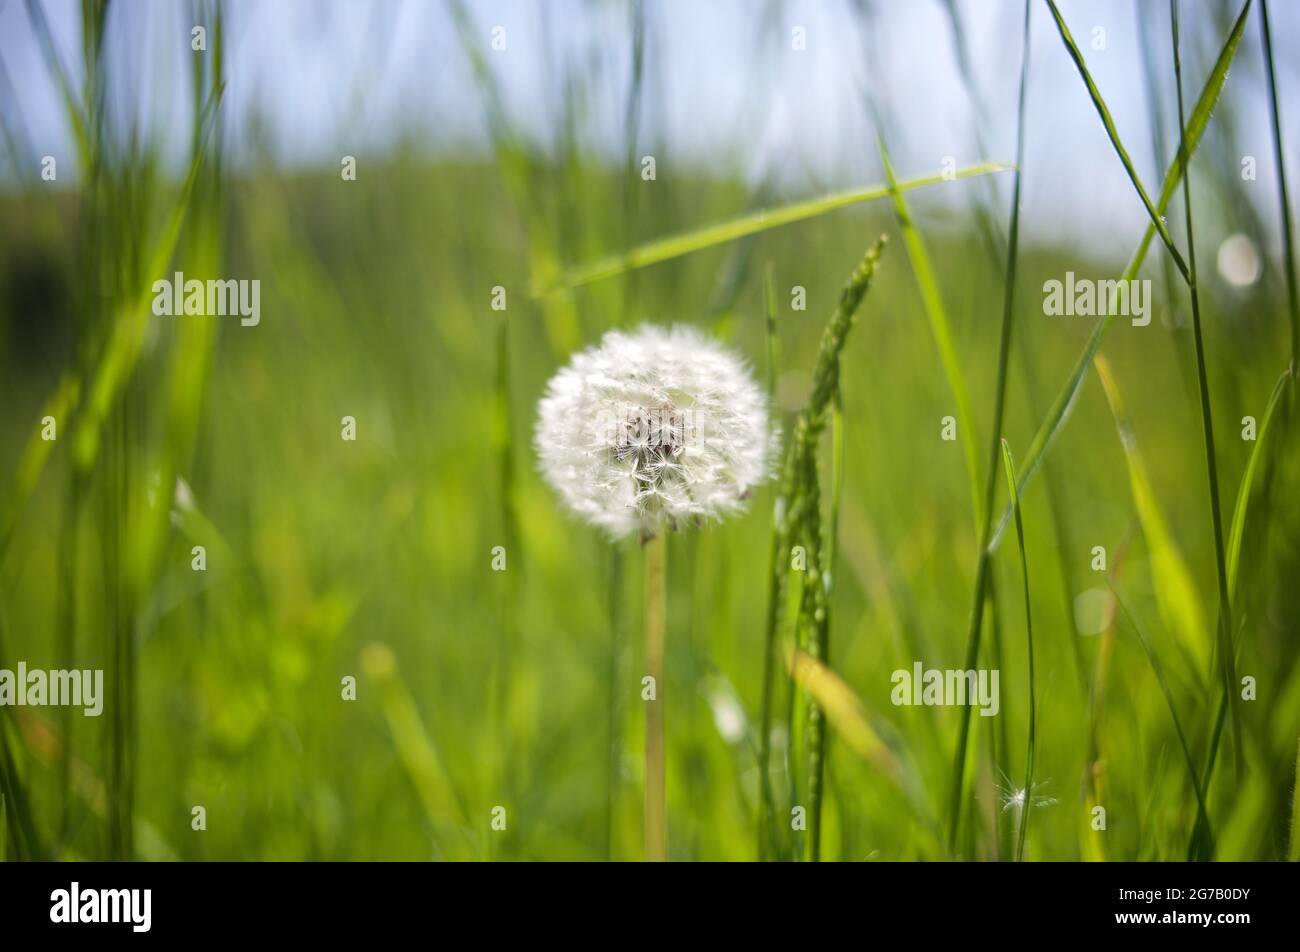 Dandelion clock full of seeds in the Sussex countryside, England, United Kingdom. Taraxacum officinale, the dandelion or common dandelion, is a flowering herbaceous perennial plant of the dandelion genus in the family Asteraceae Stock Photo